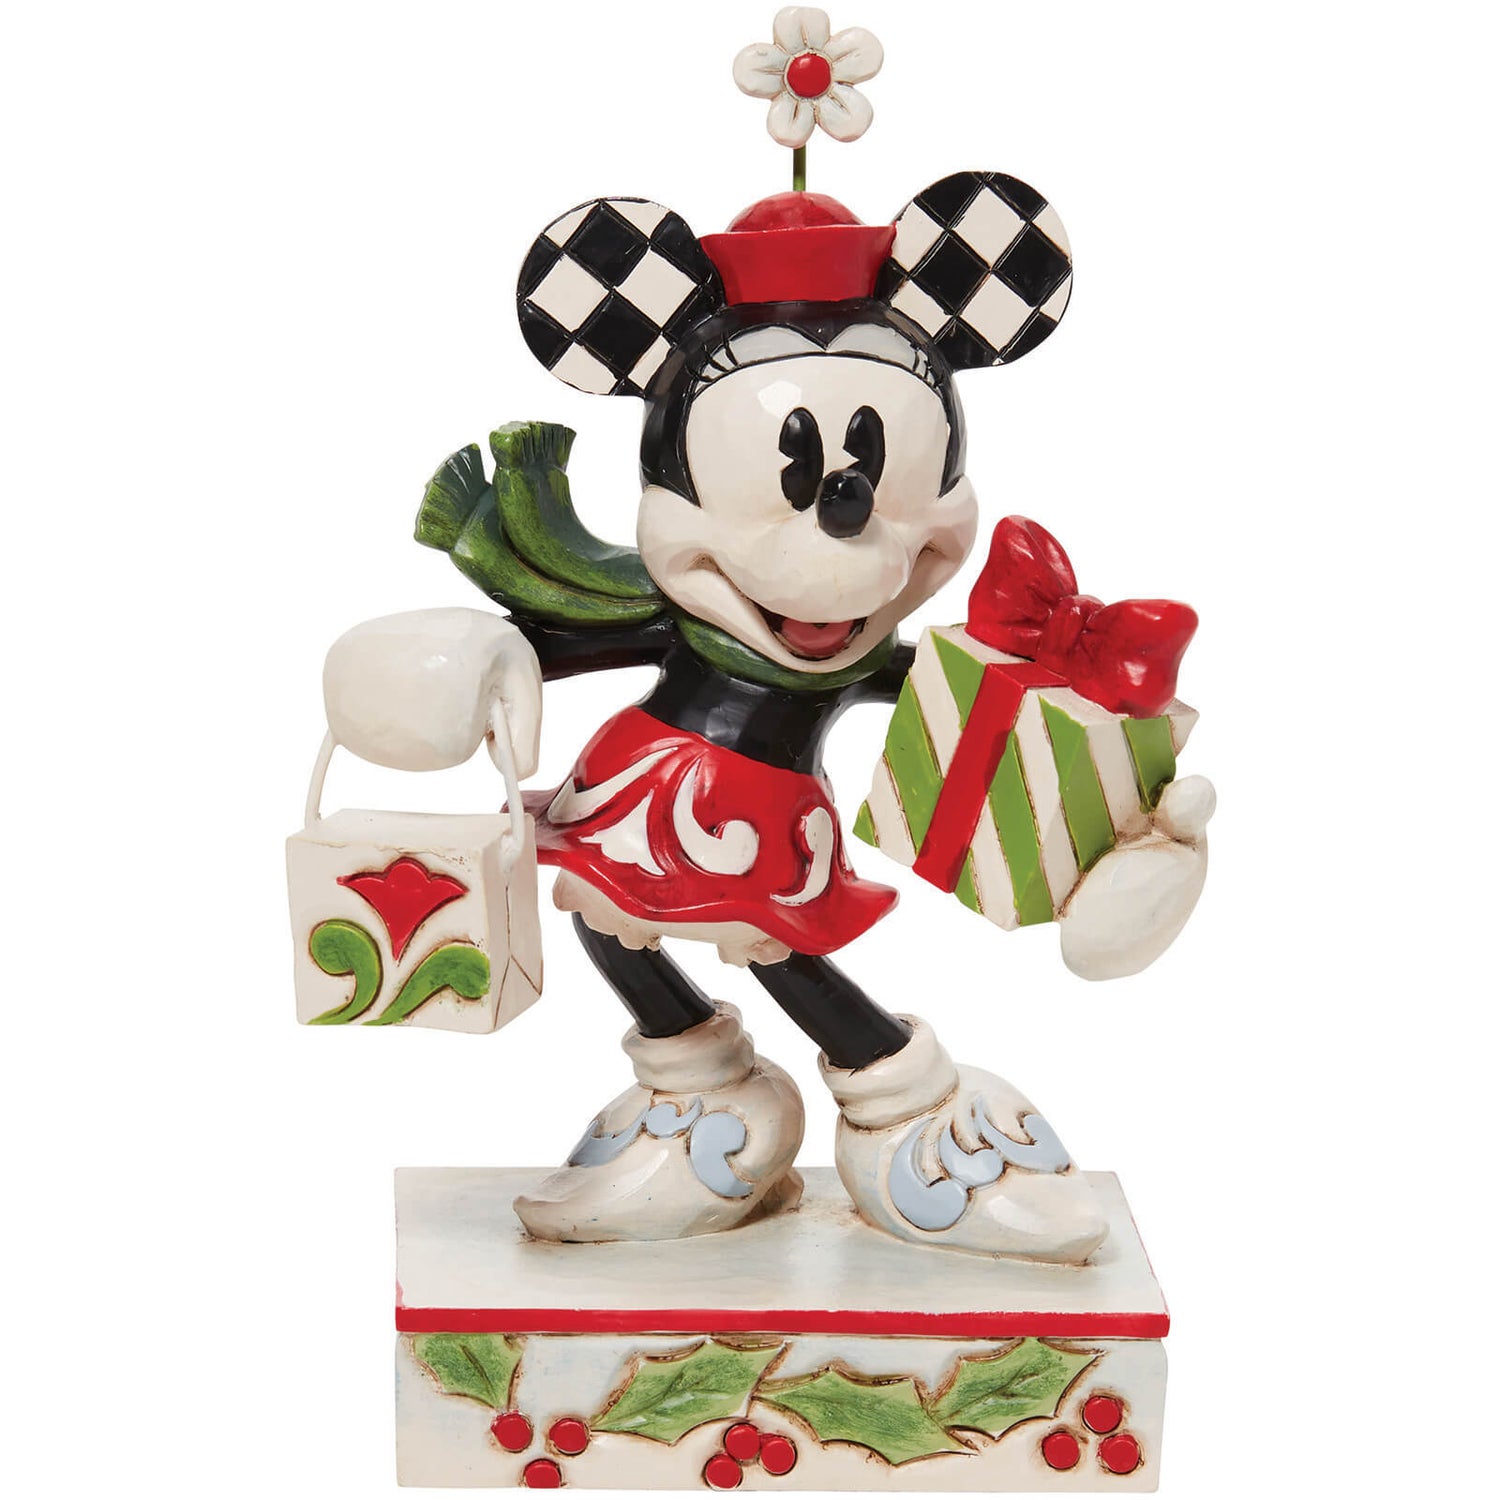 Disney Traditions Christmas Minnie Mouse with Presents Figurine